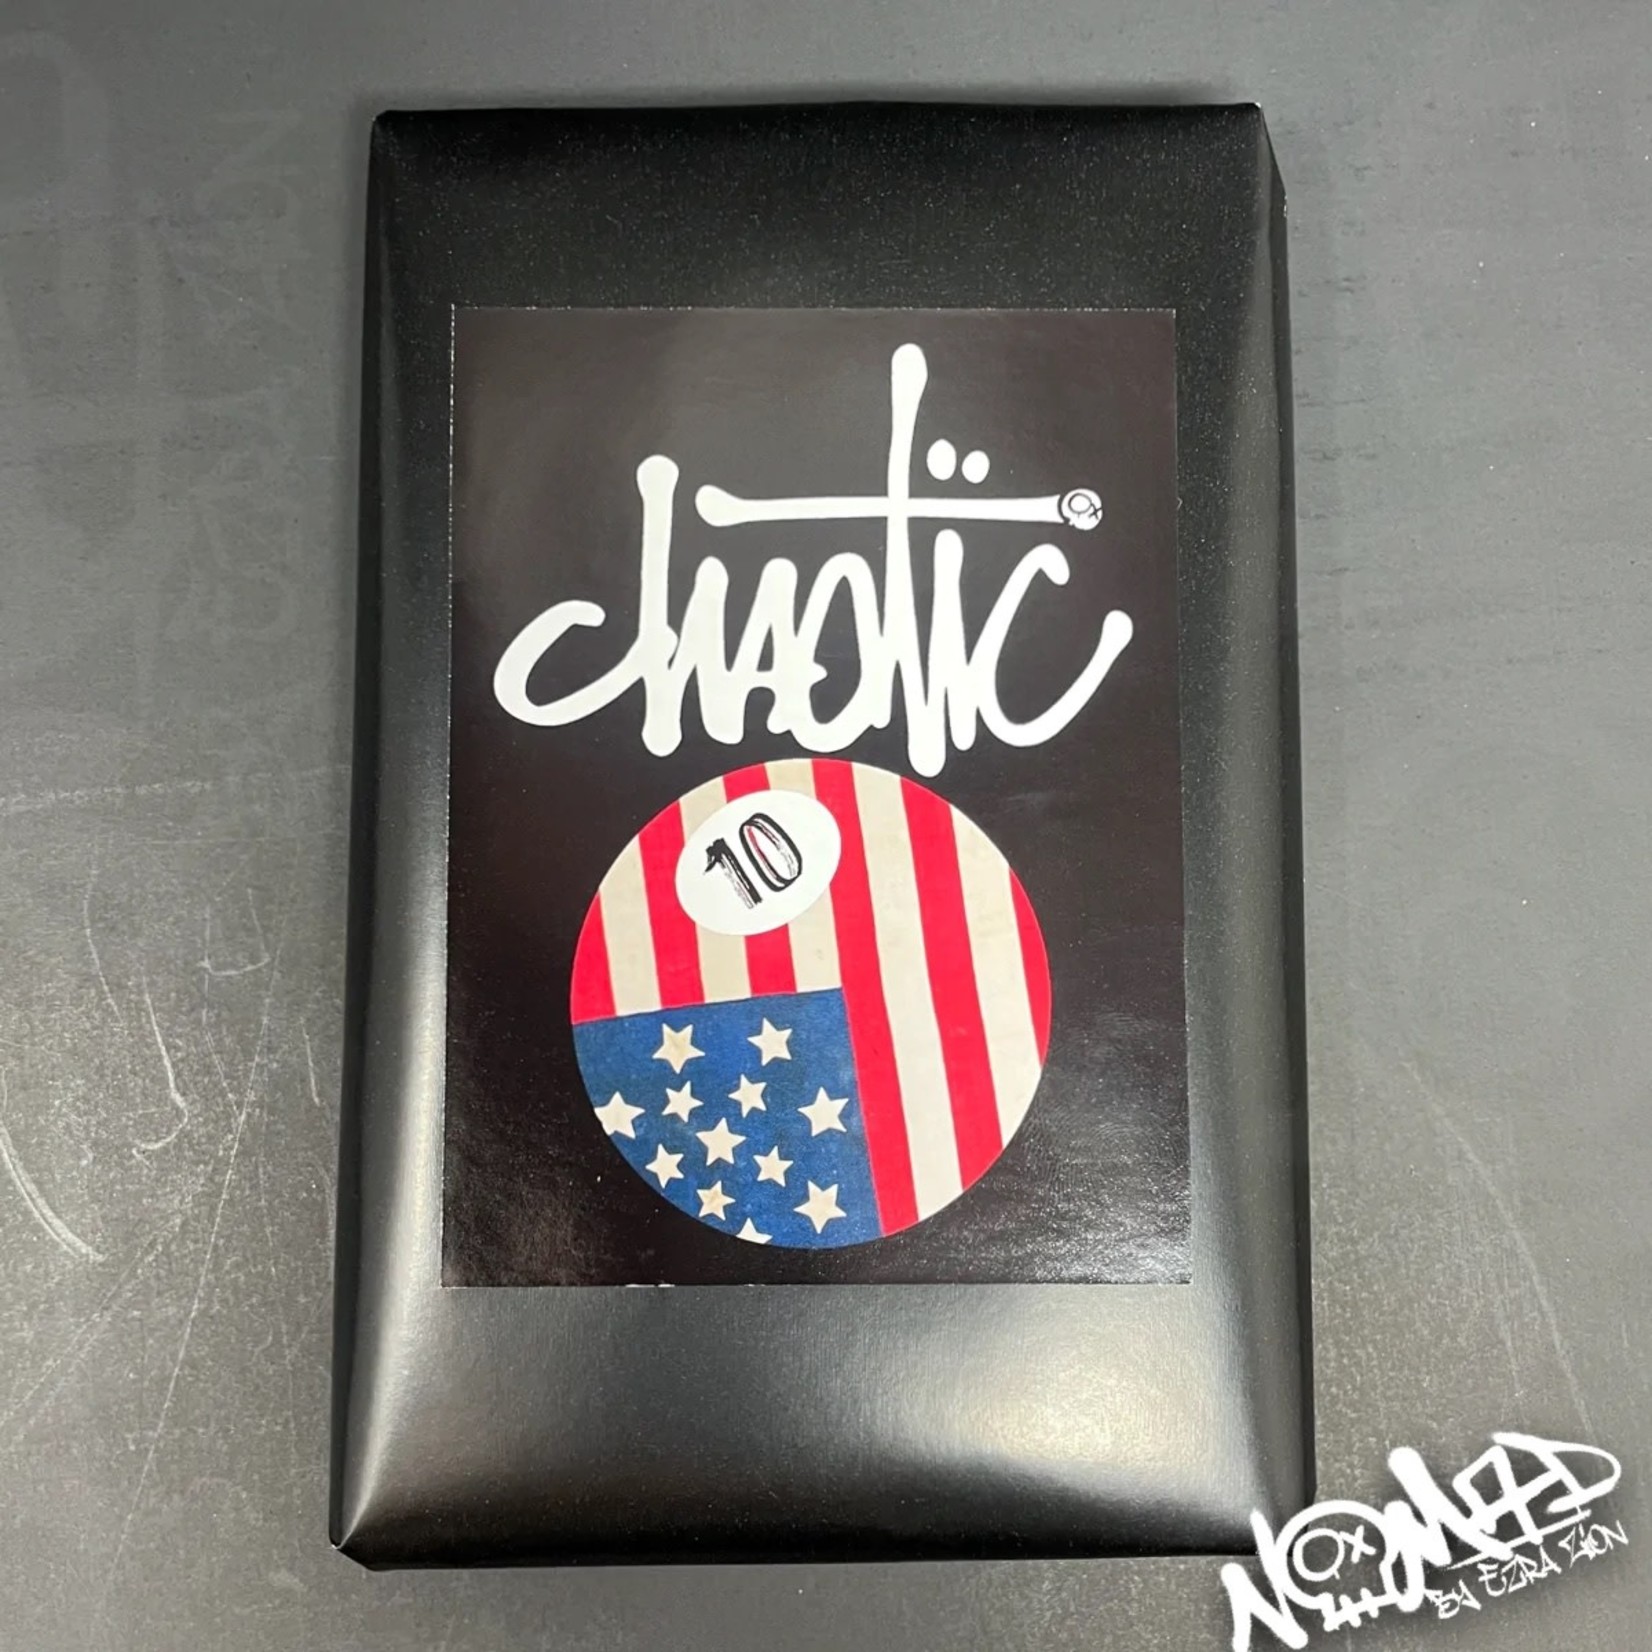 Nomad Cigars CHAOTIC 10nth ANNIVERSARY EDITION